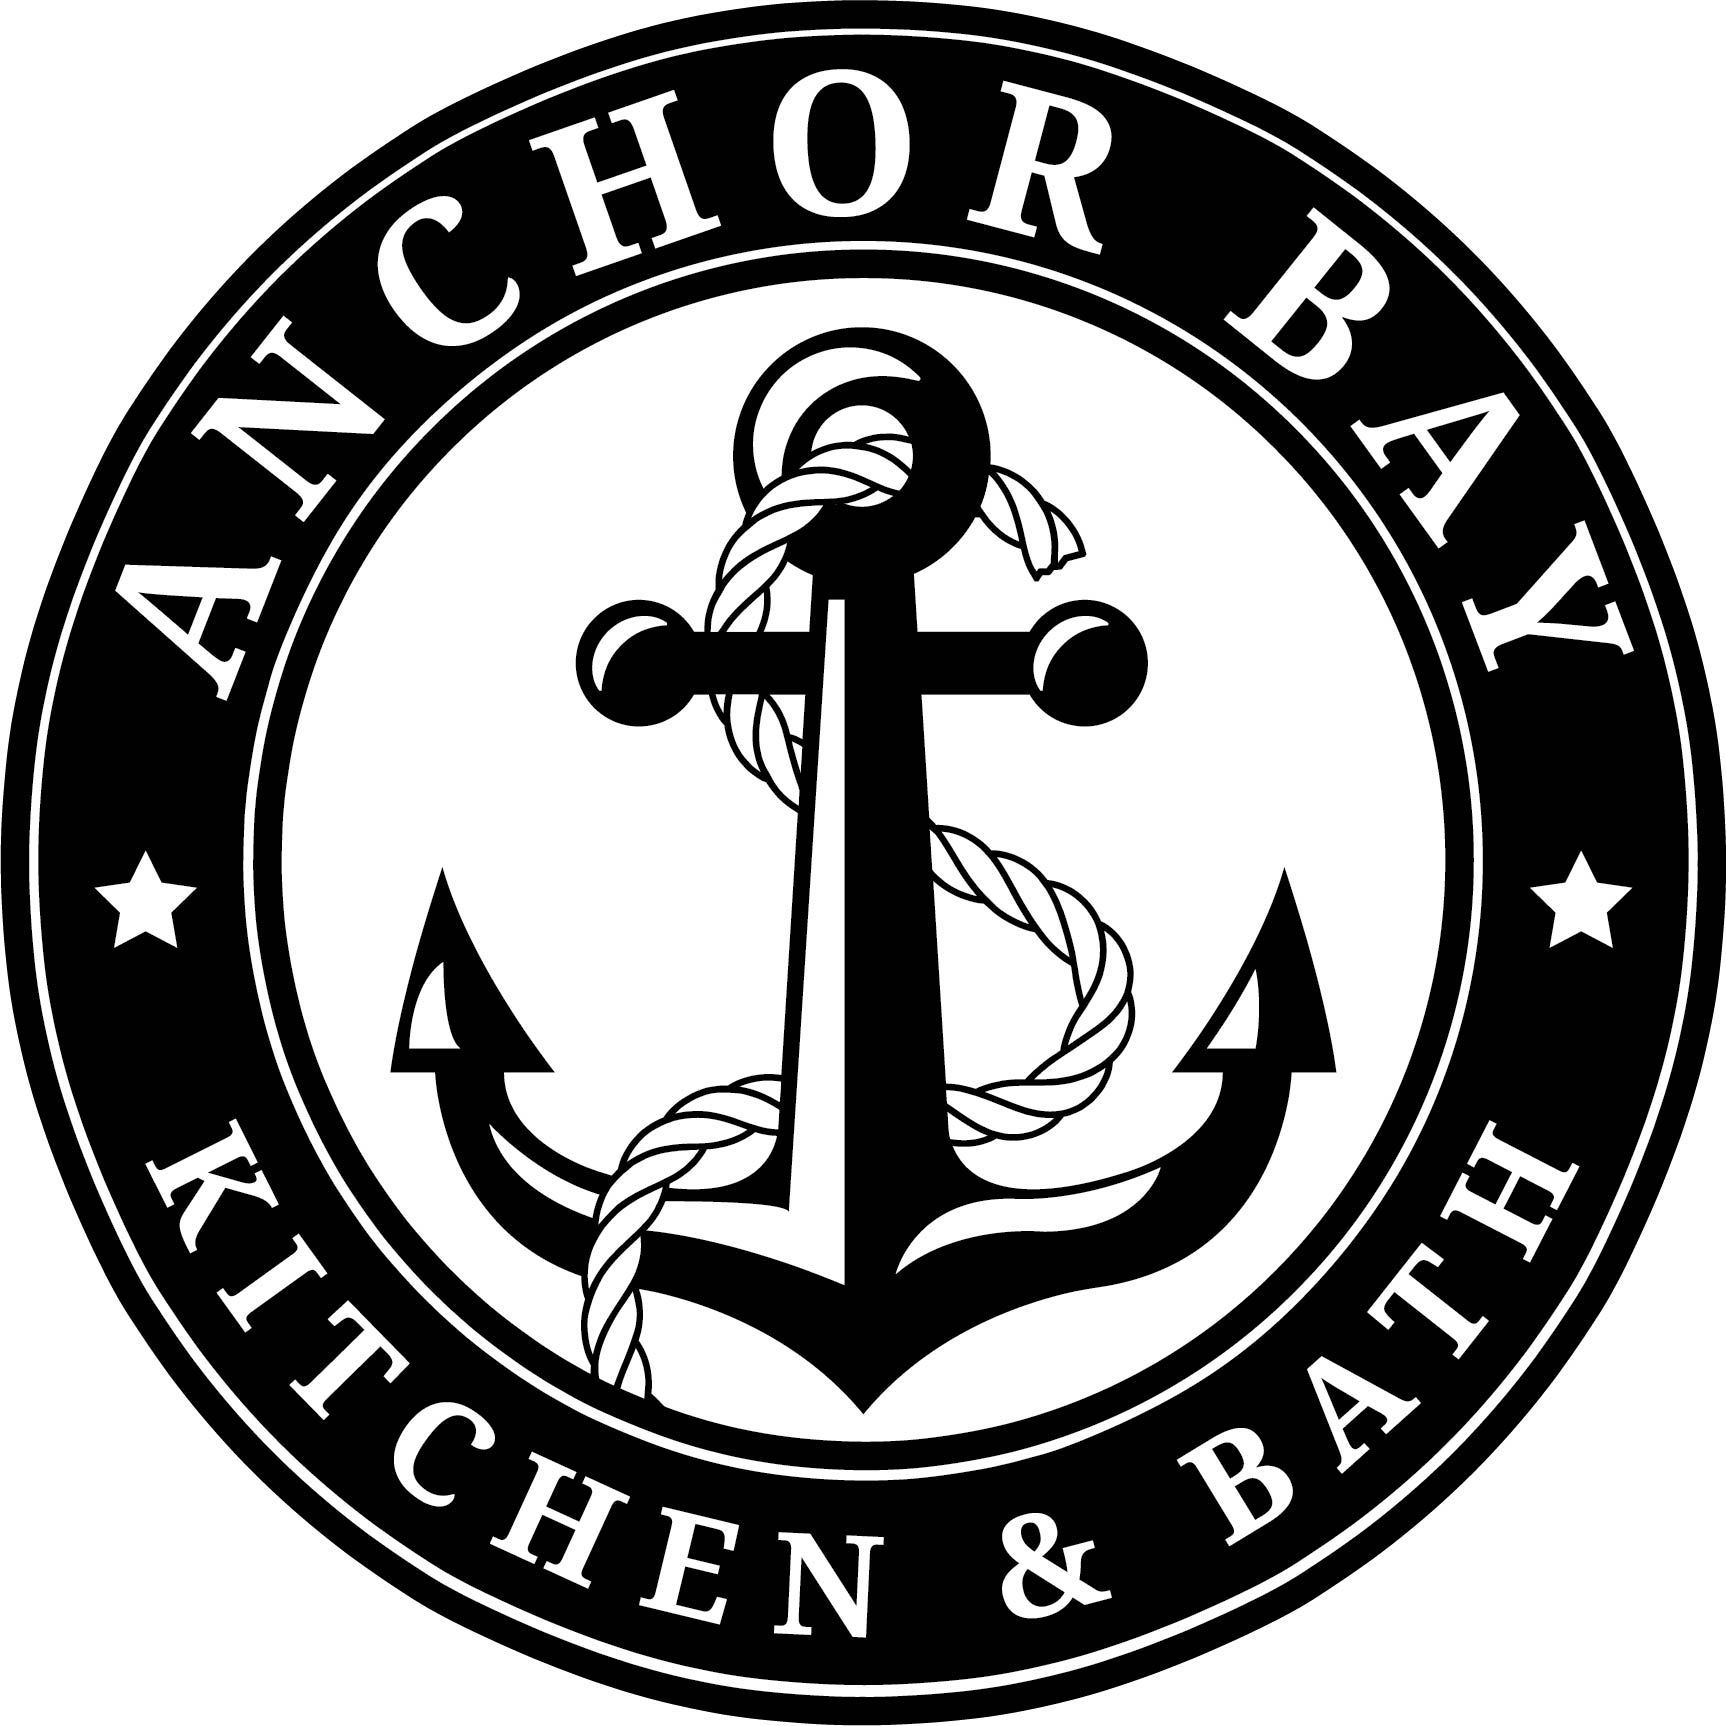 A black and white logo for Anchor Bay Kitchen and Bath in New Baltimore, MI